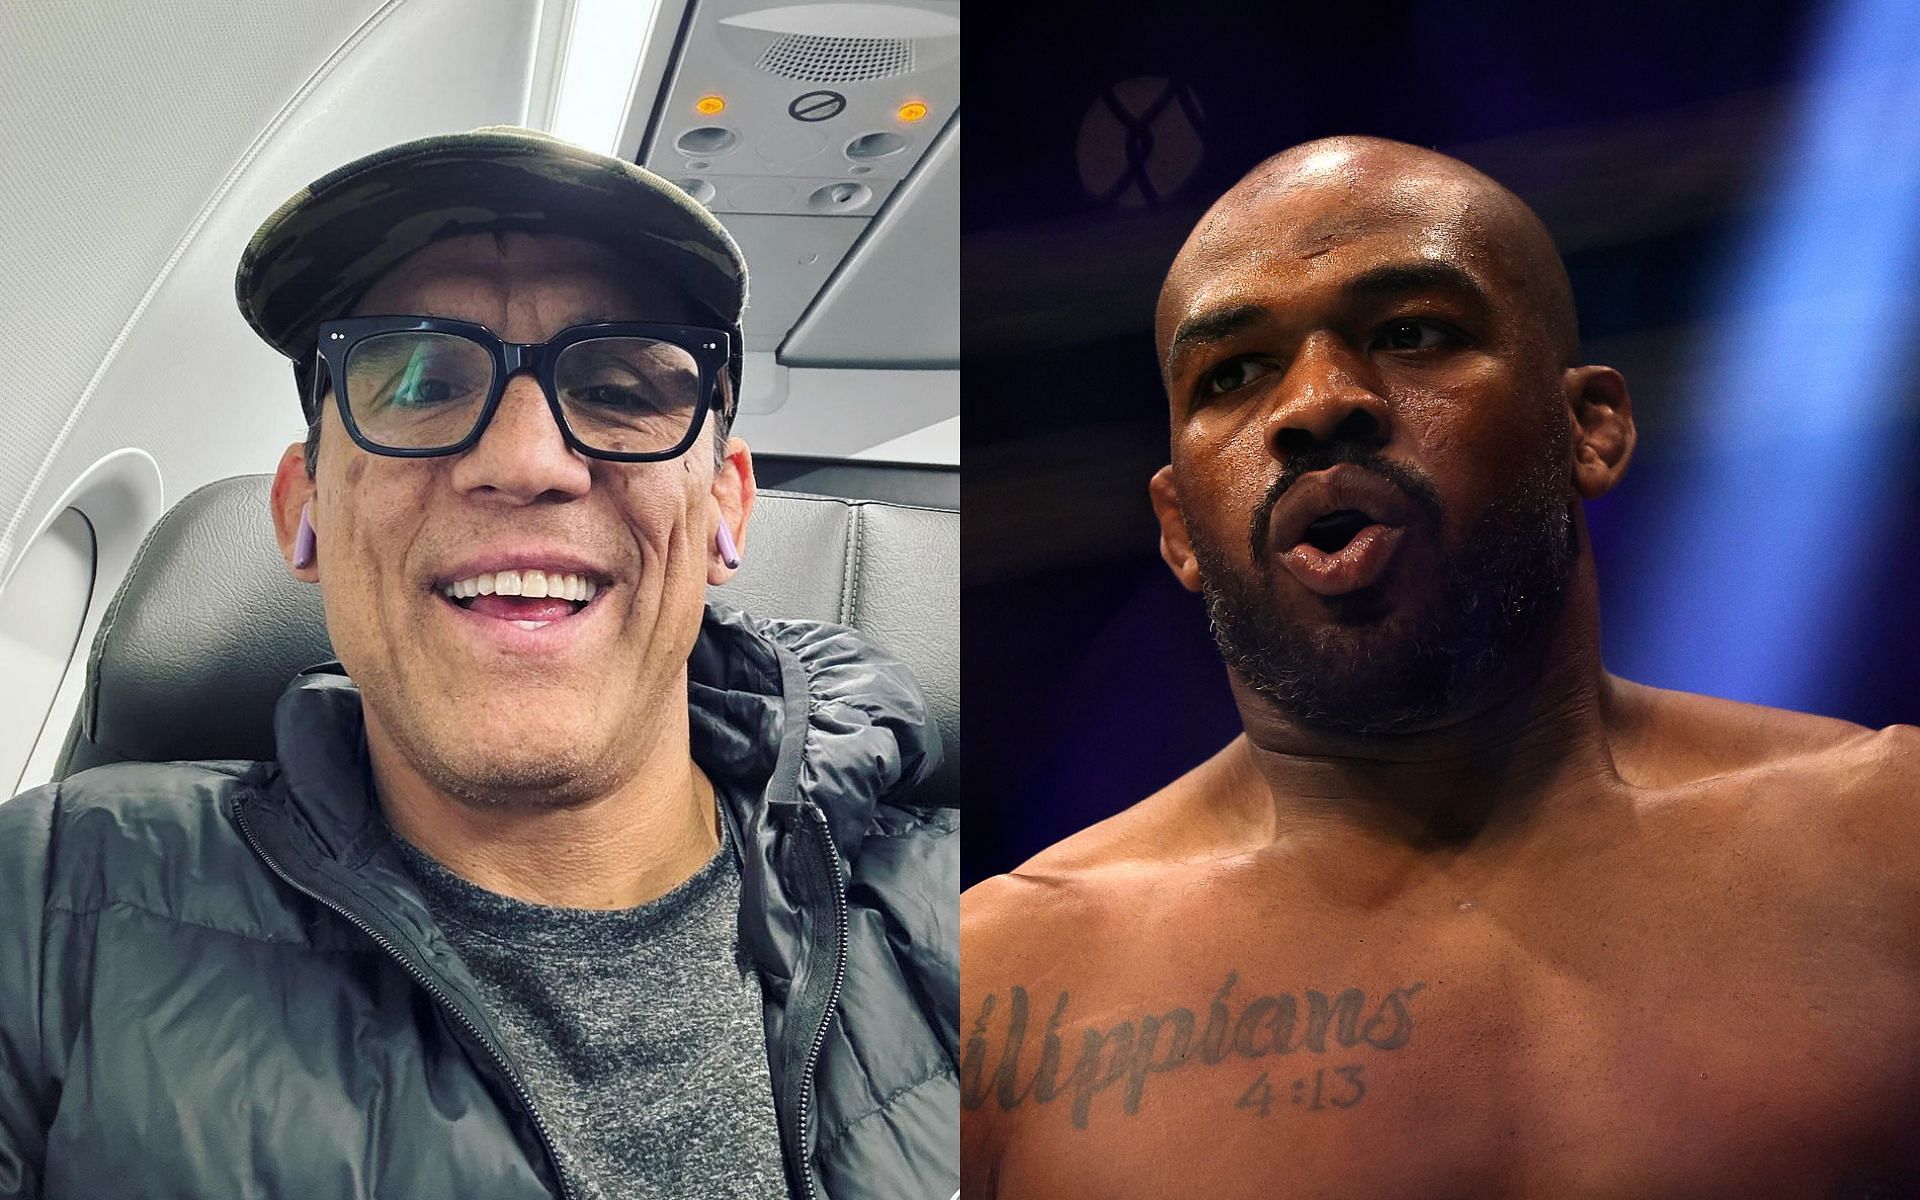 Frank Shamrock (left) and Jon Jones (right) are shining examples of a true well-rounded MMA combatant [Images courtesy: @frankshamrock on Instagram and Getty Images]